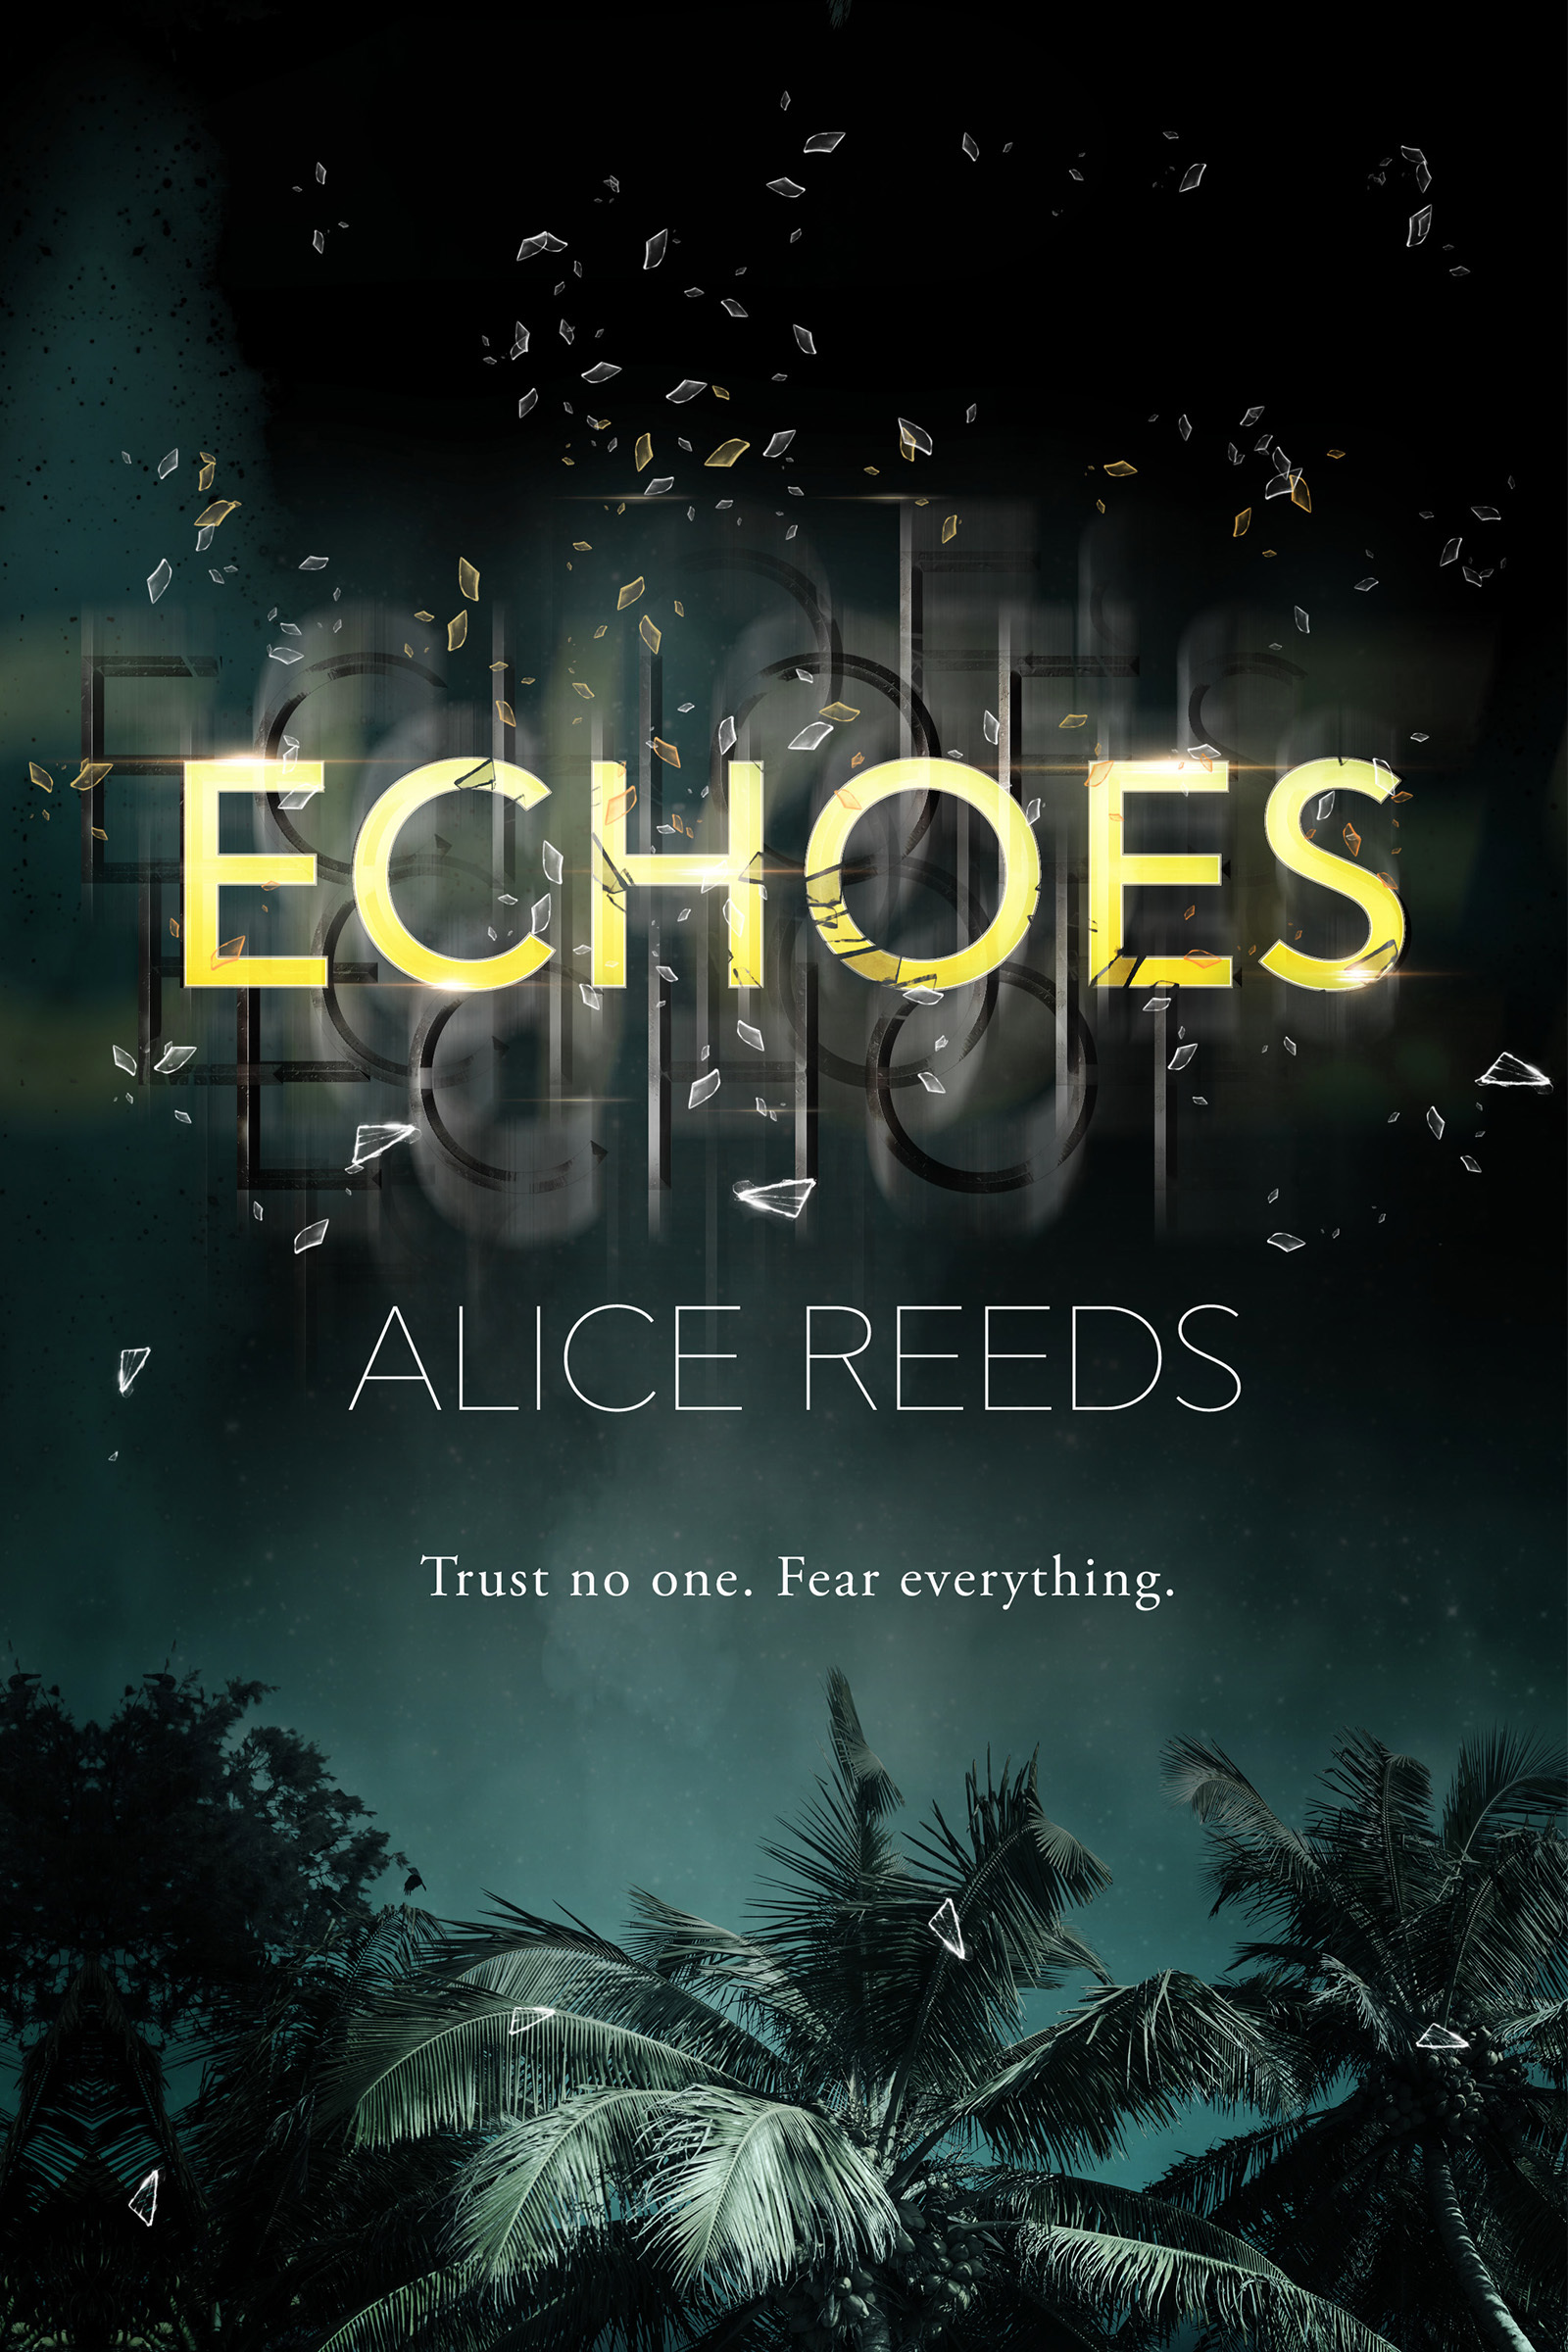 Echoes by Alice Reeds